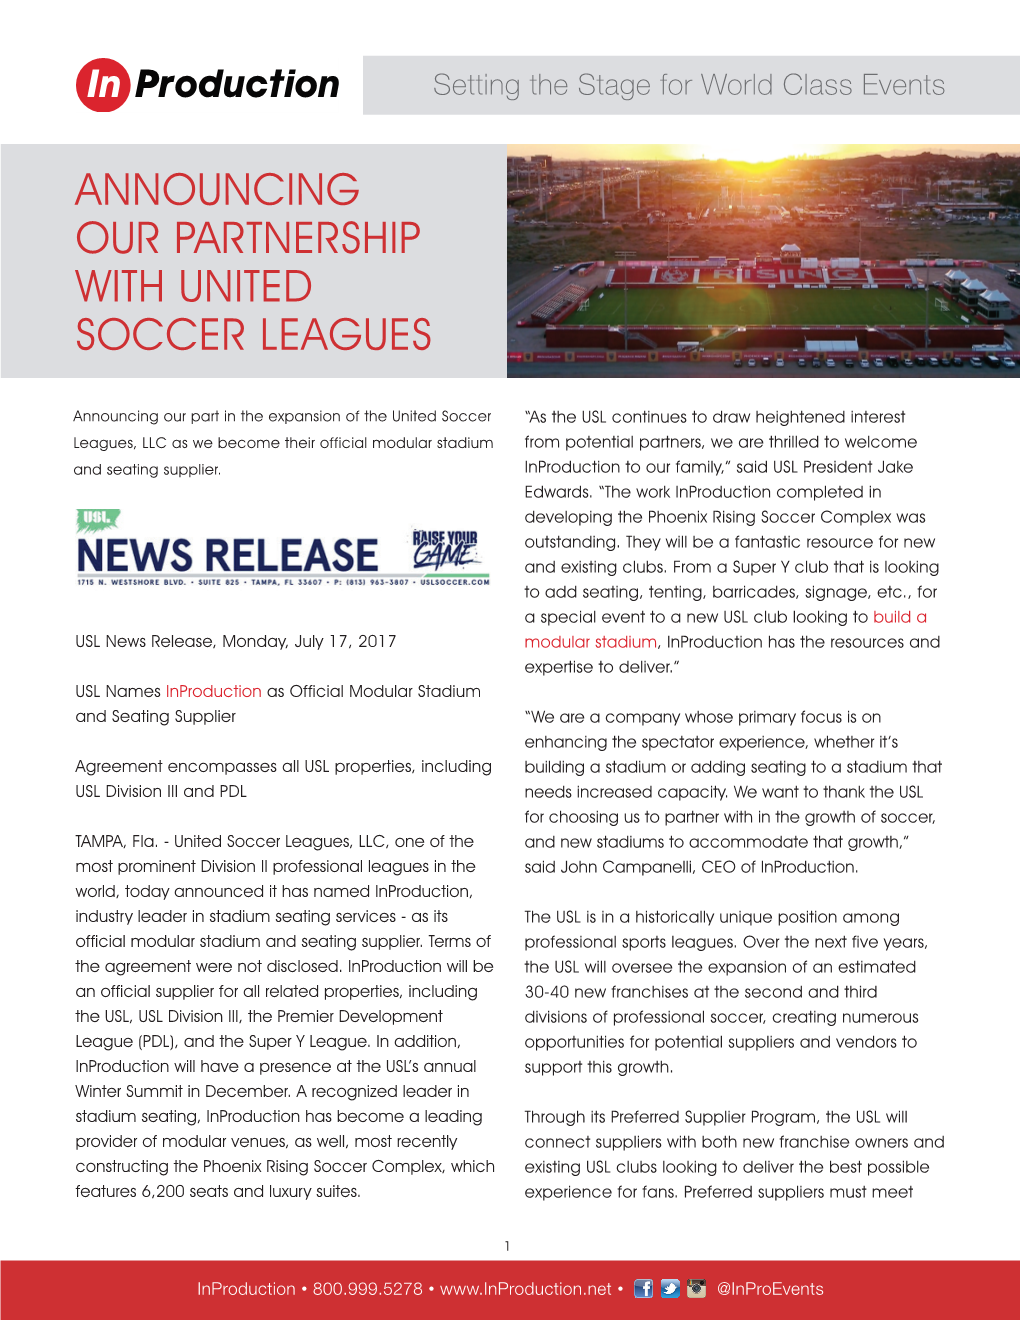 Announcing Our Partnership with United Soccer Leagues